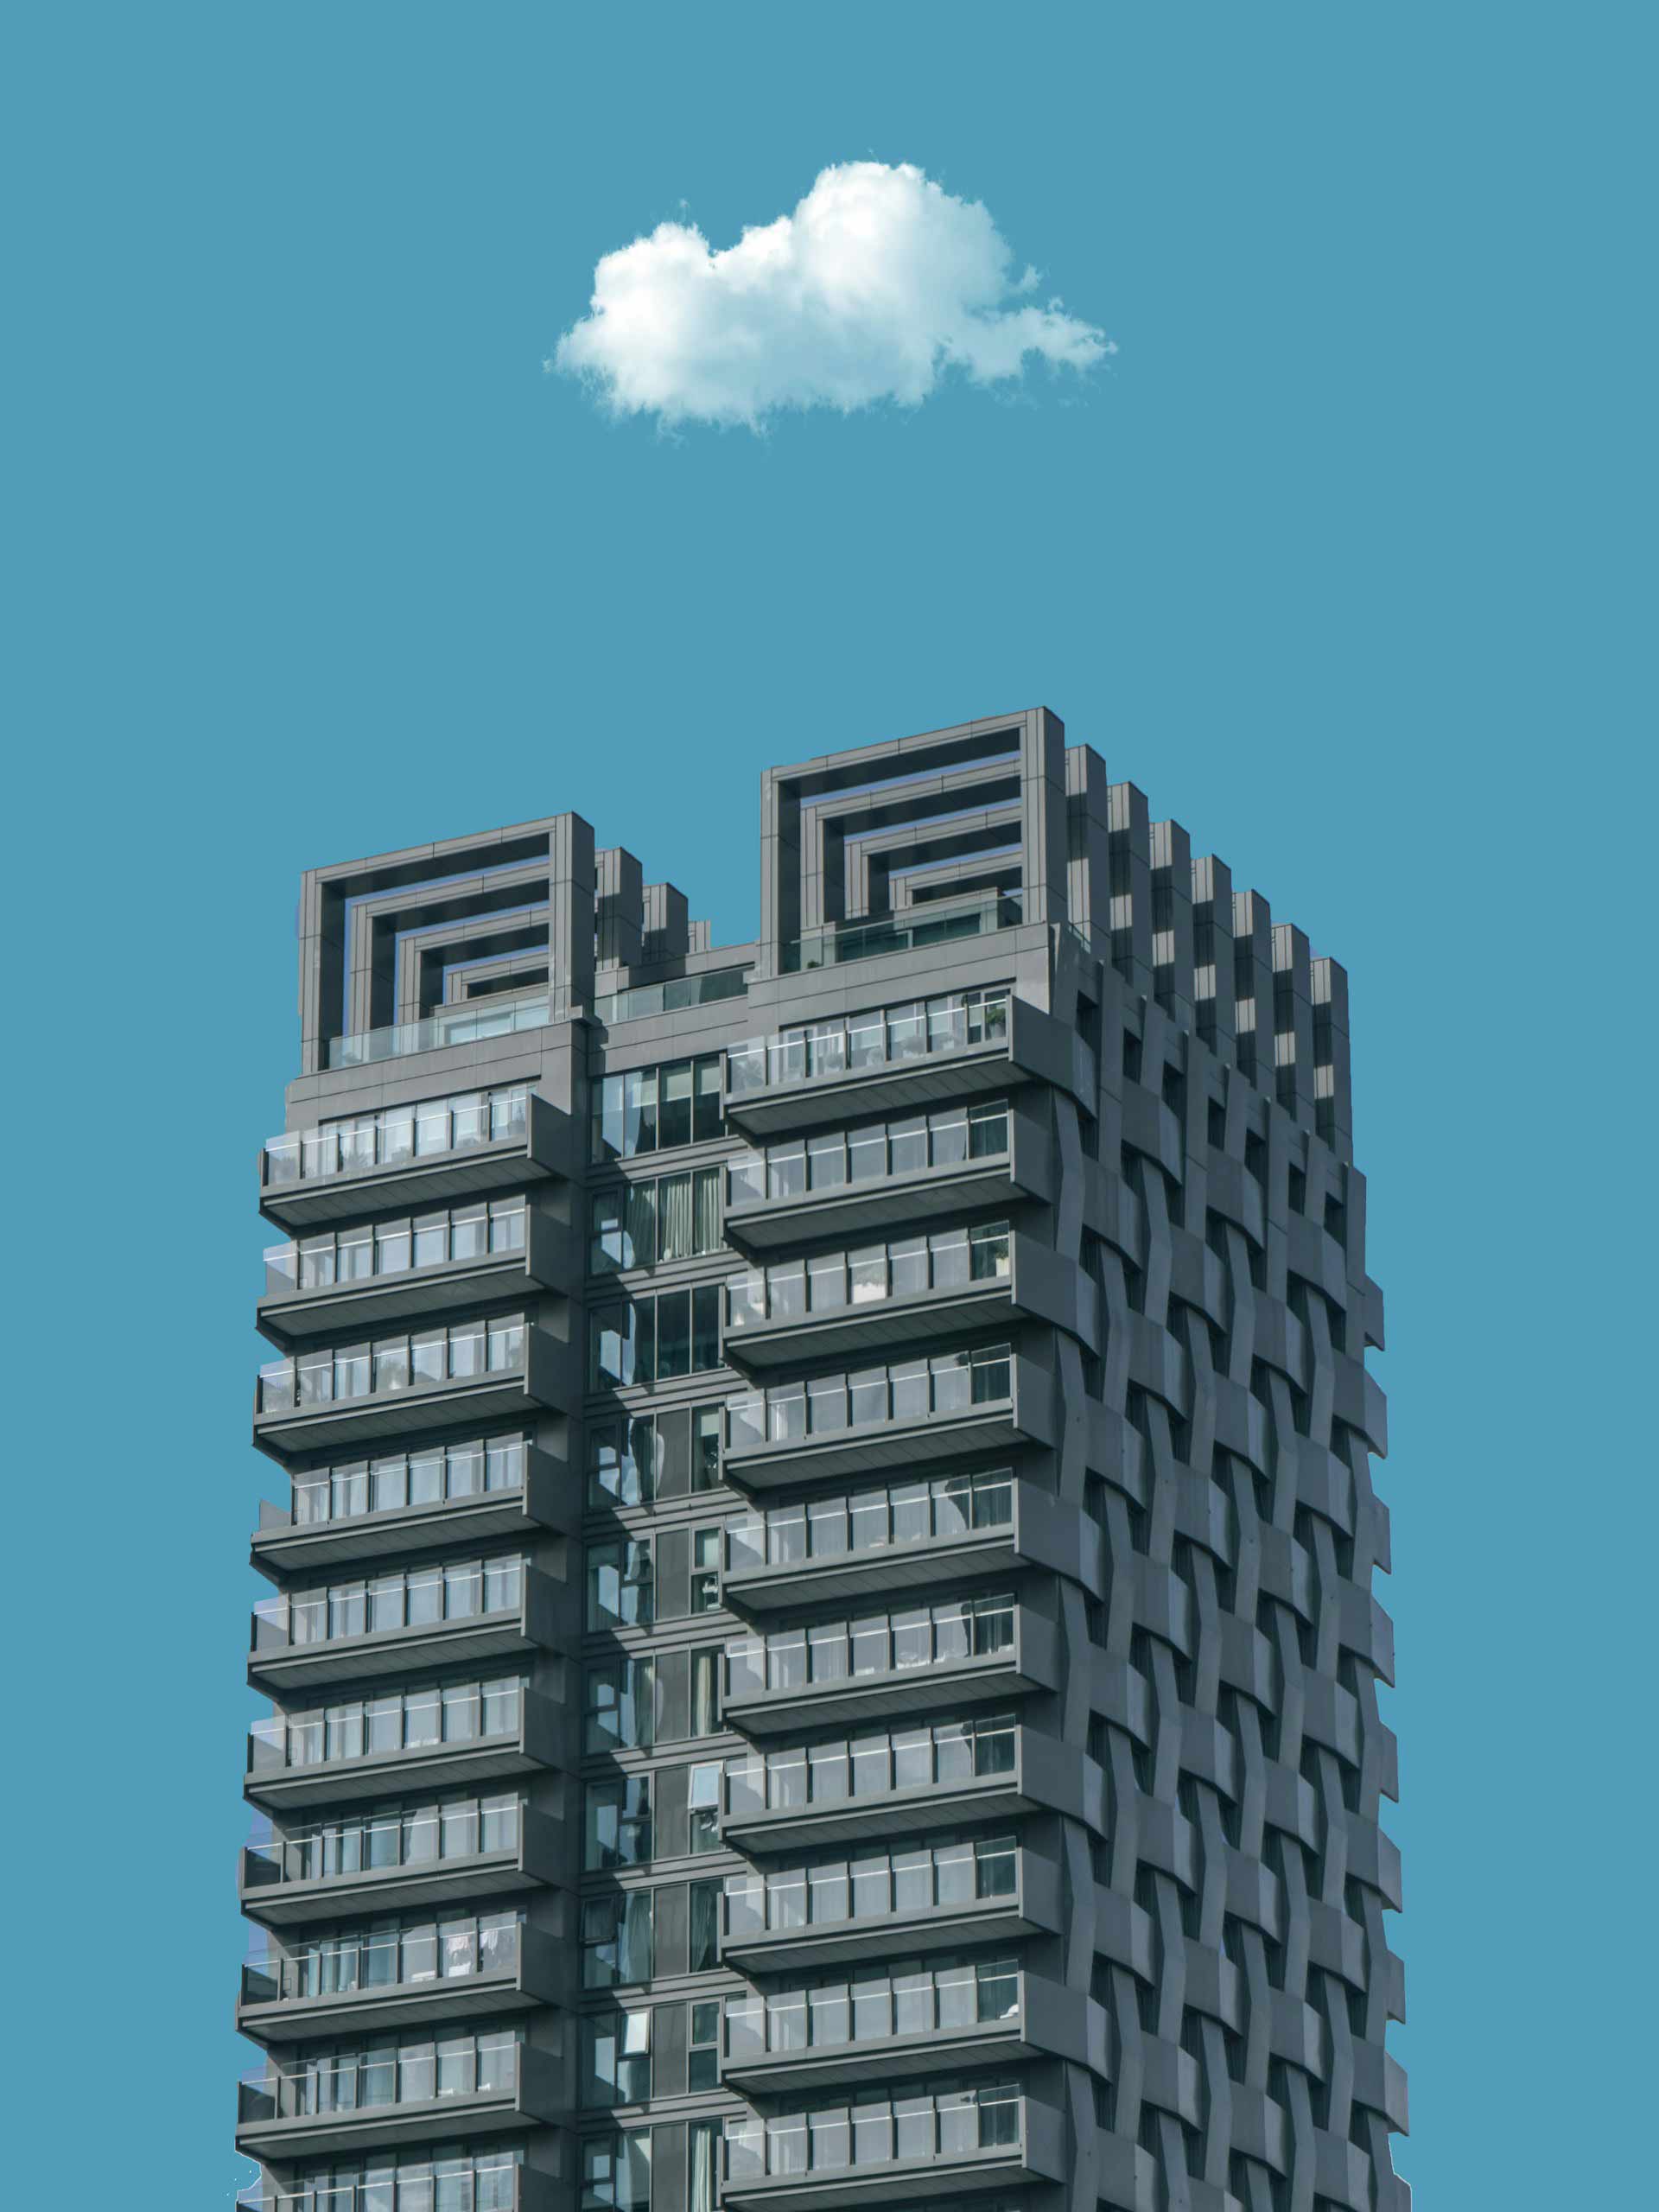 An abstract building with a single cloud hovering above the building.